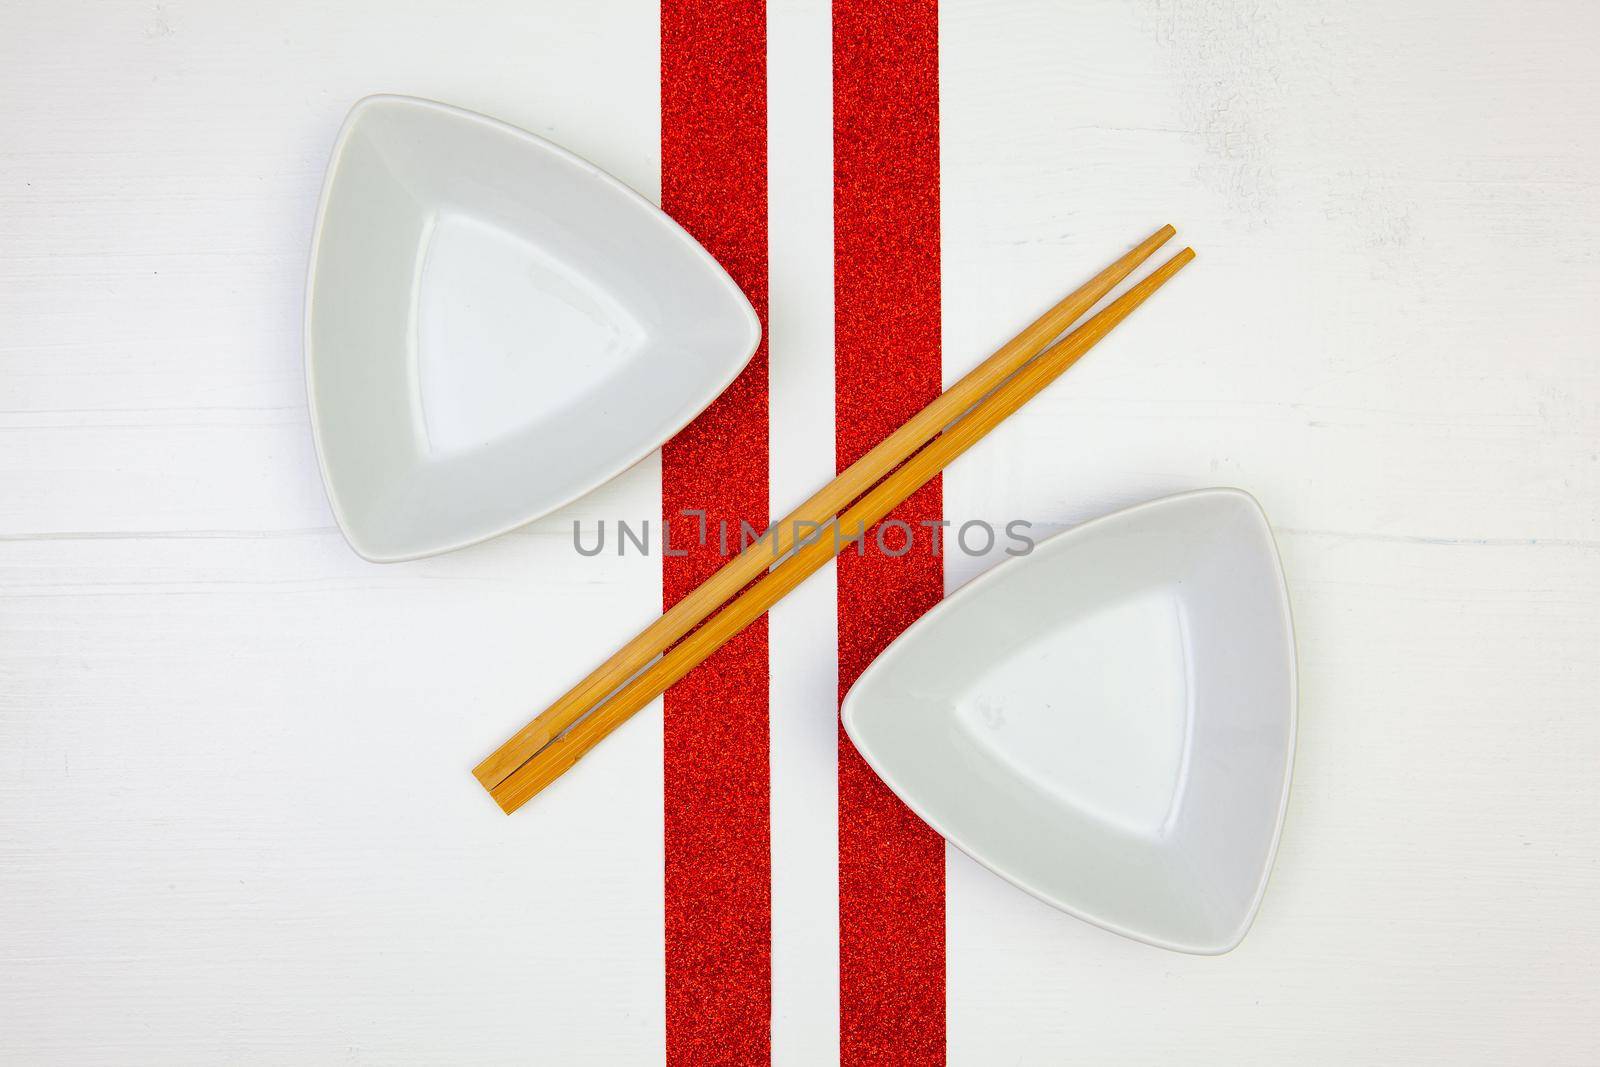 Ceramic bowls  and bamboo chopsticks for sushi food  by CaptureLight